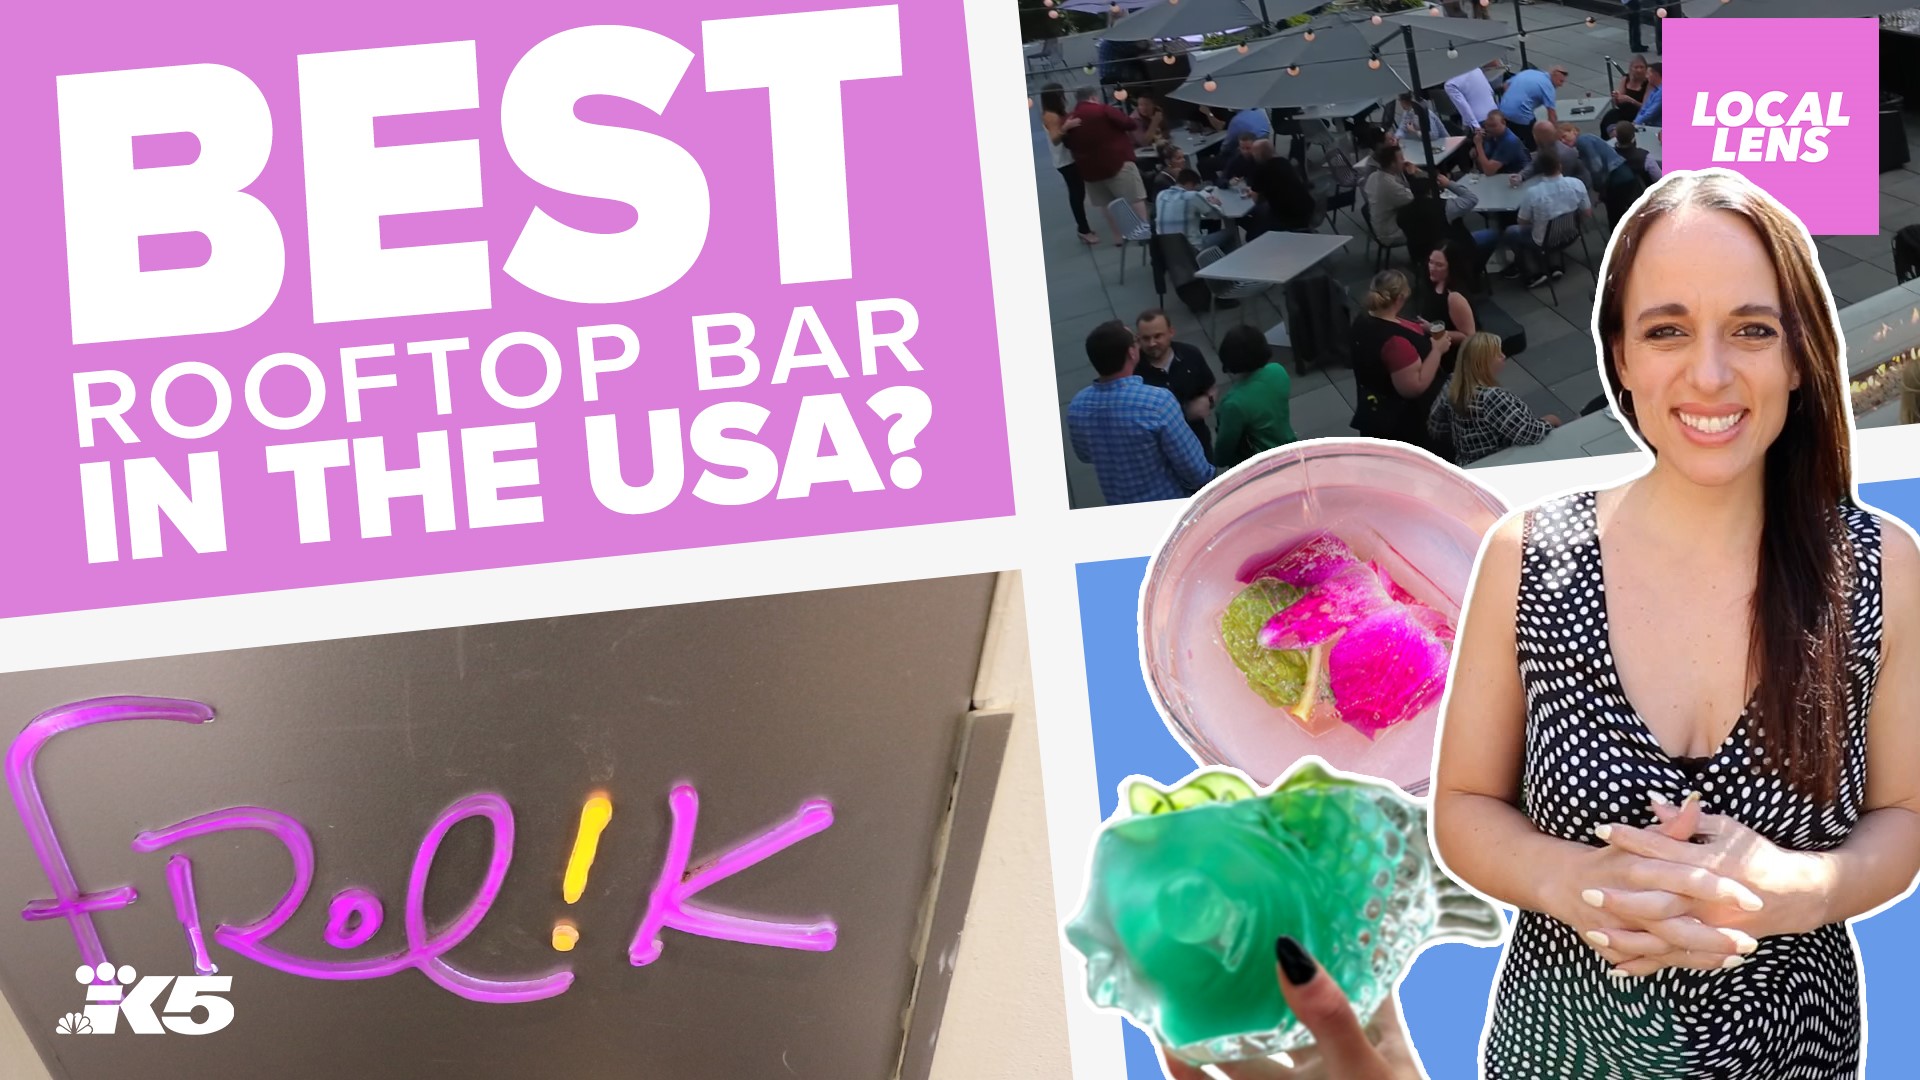 One local spot tops the charts for best rooftop bar!